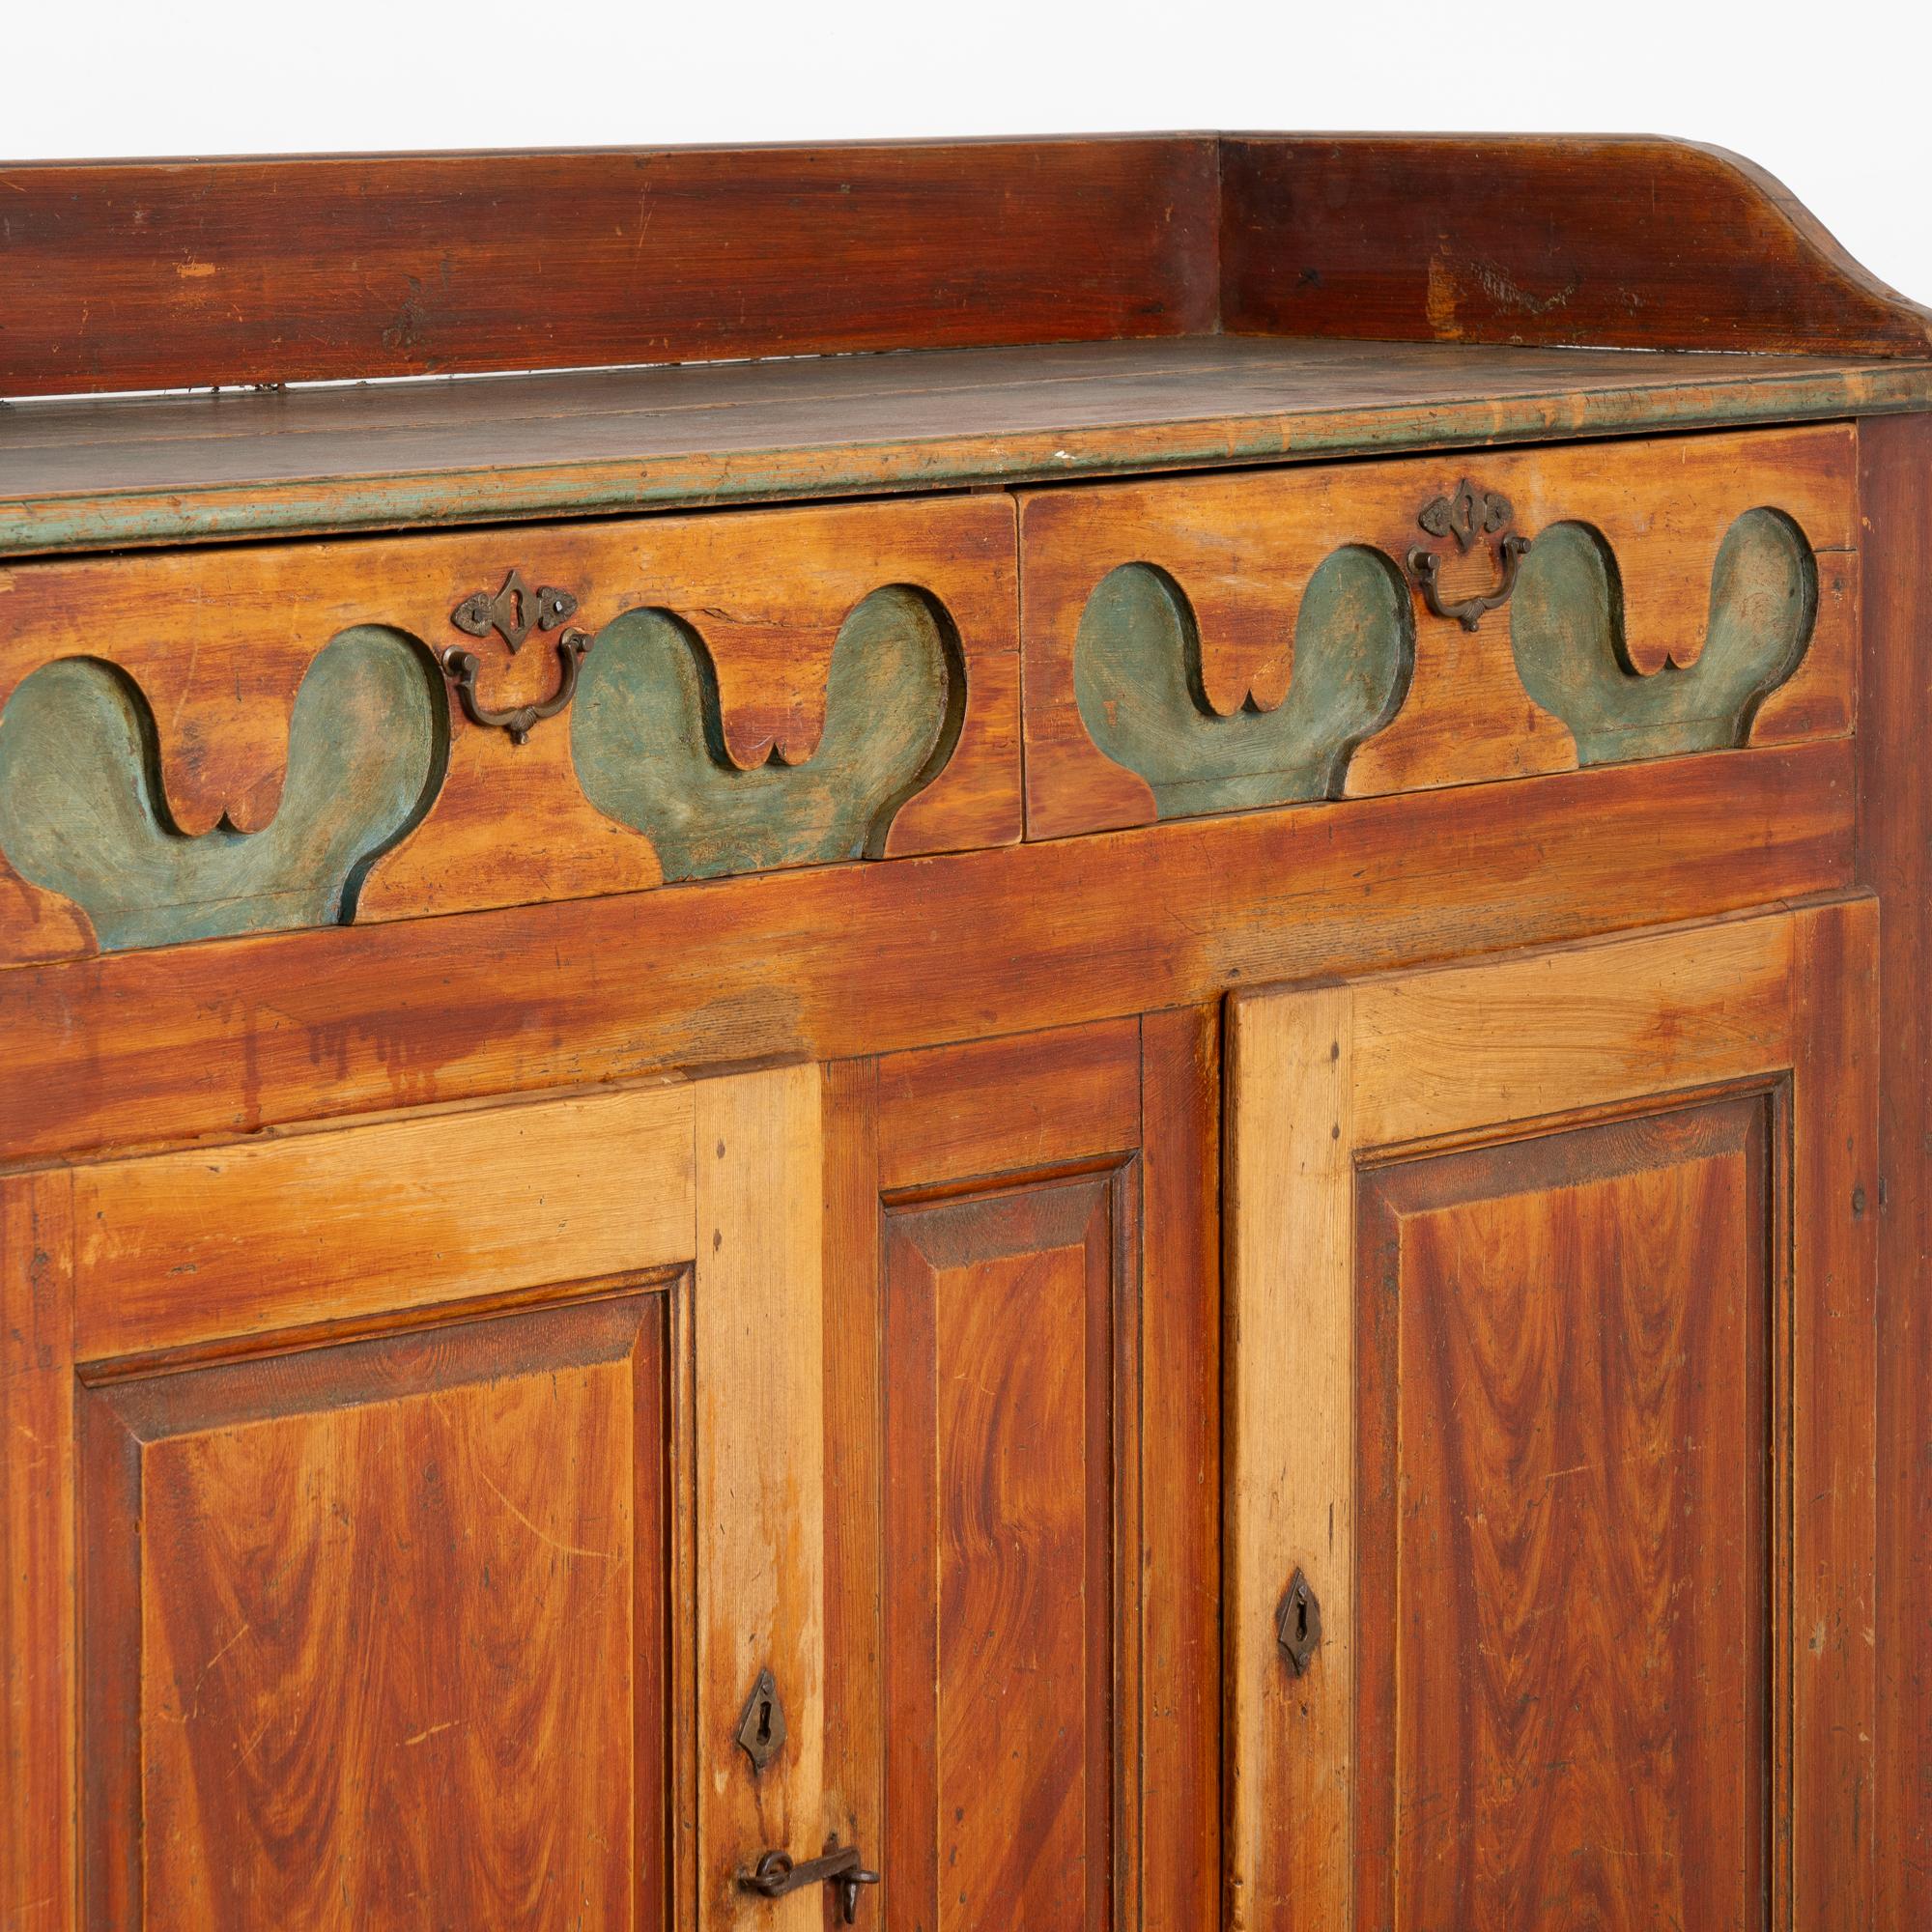 Original Painted Sideboard Cabinet from Sweden, circa 1820-40 For Sale 1